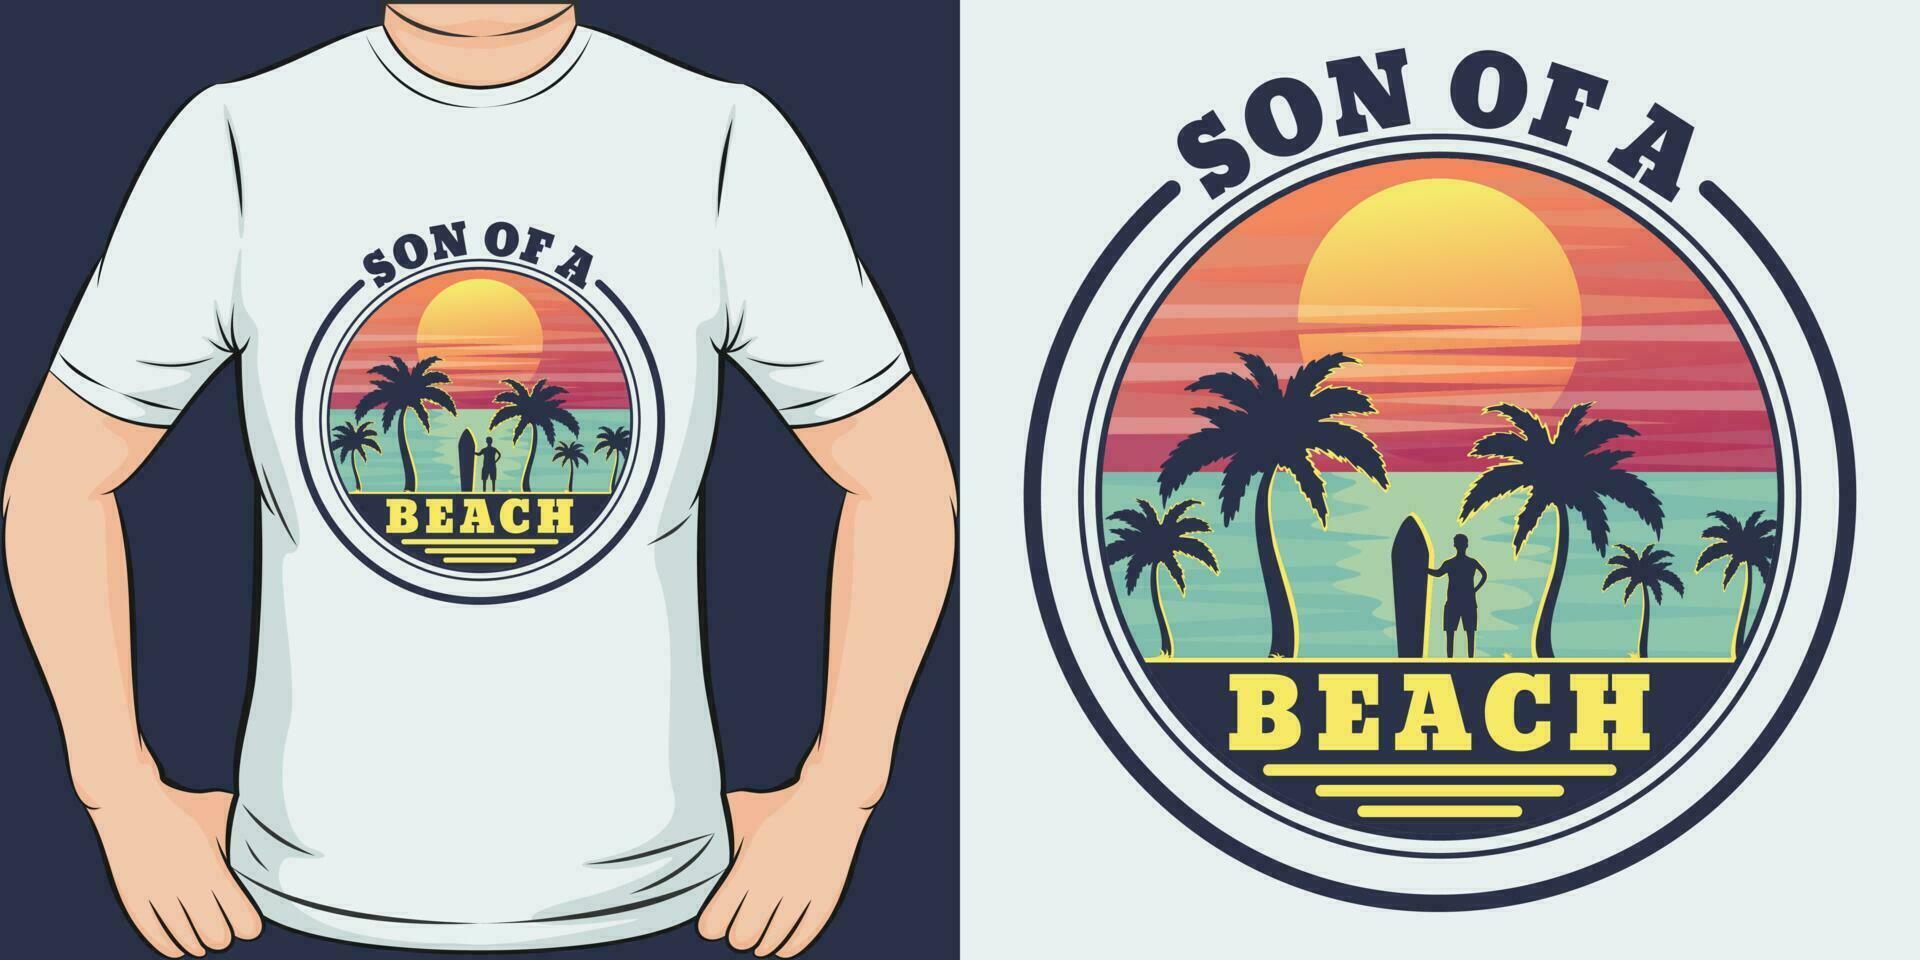 Son of a Beach, Funny Quote T-Shirt Design. vector